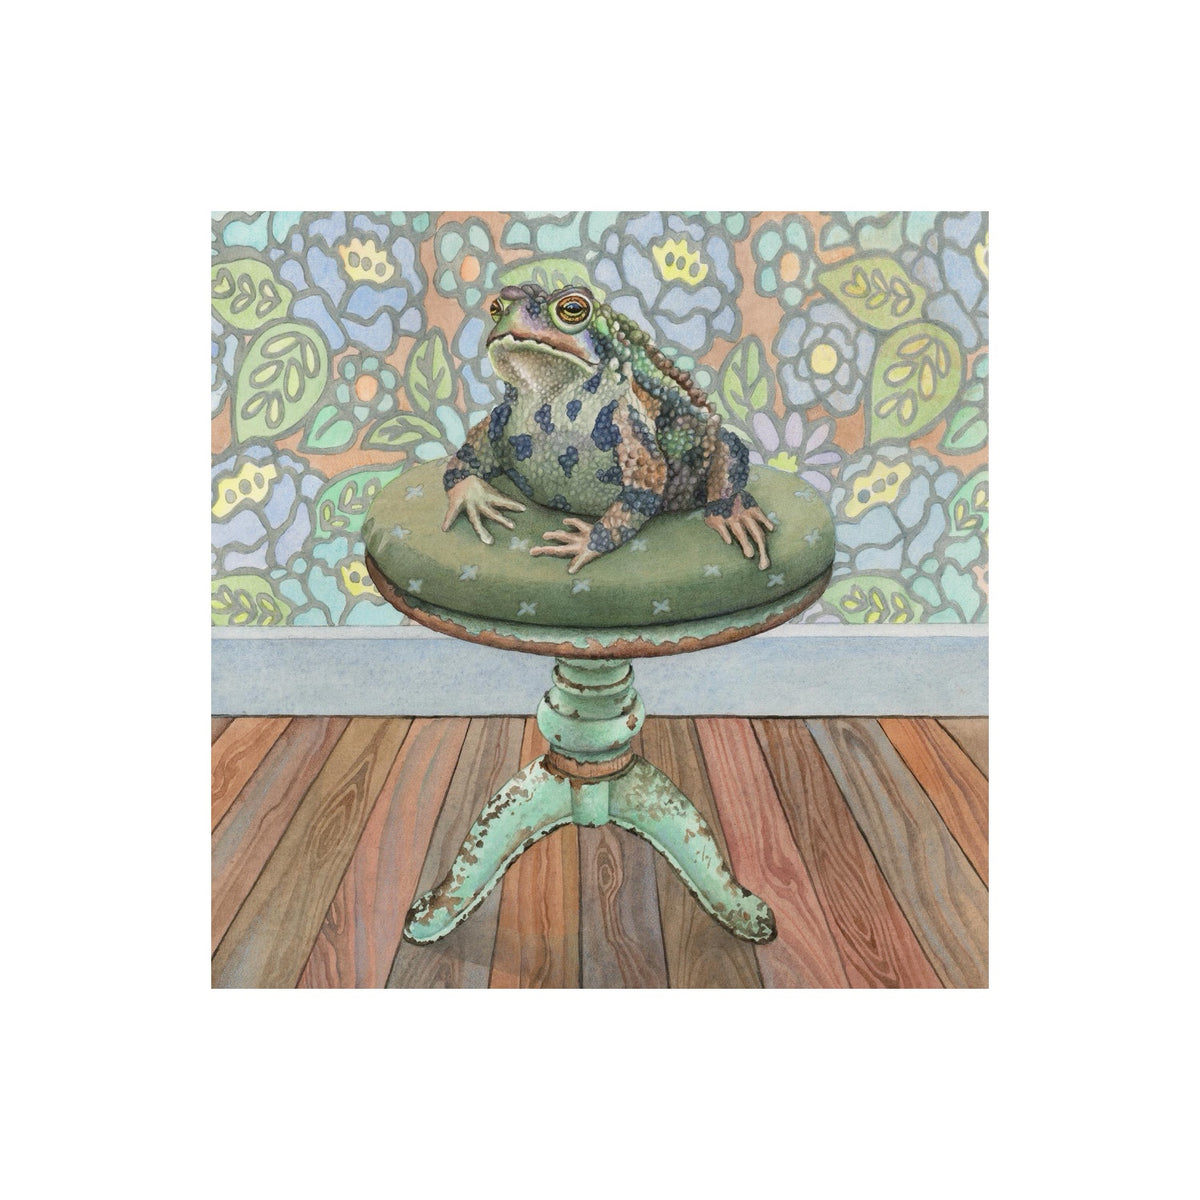 Cori Lee Marvin Framed print- Toad's Stool